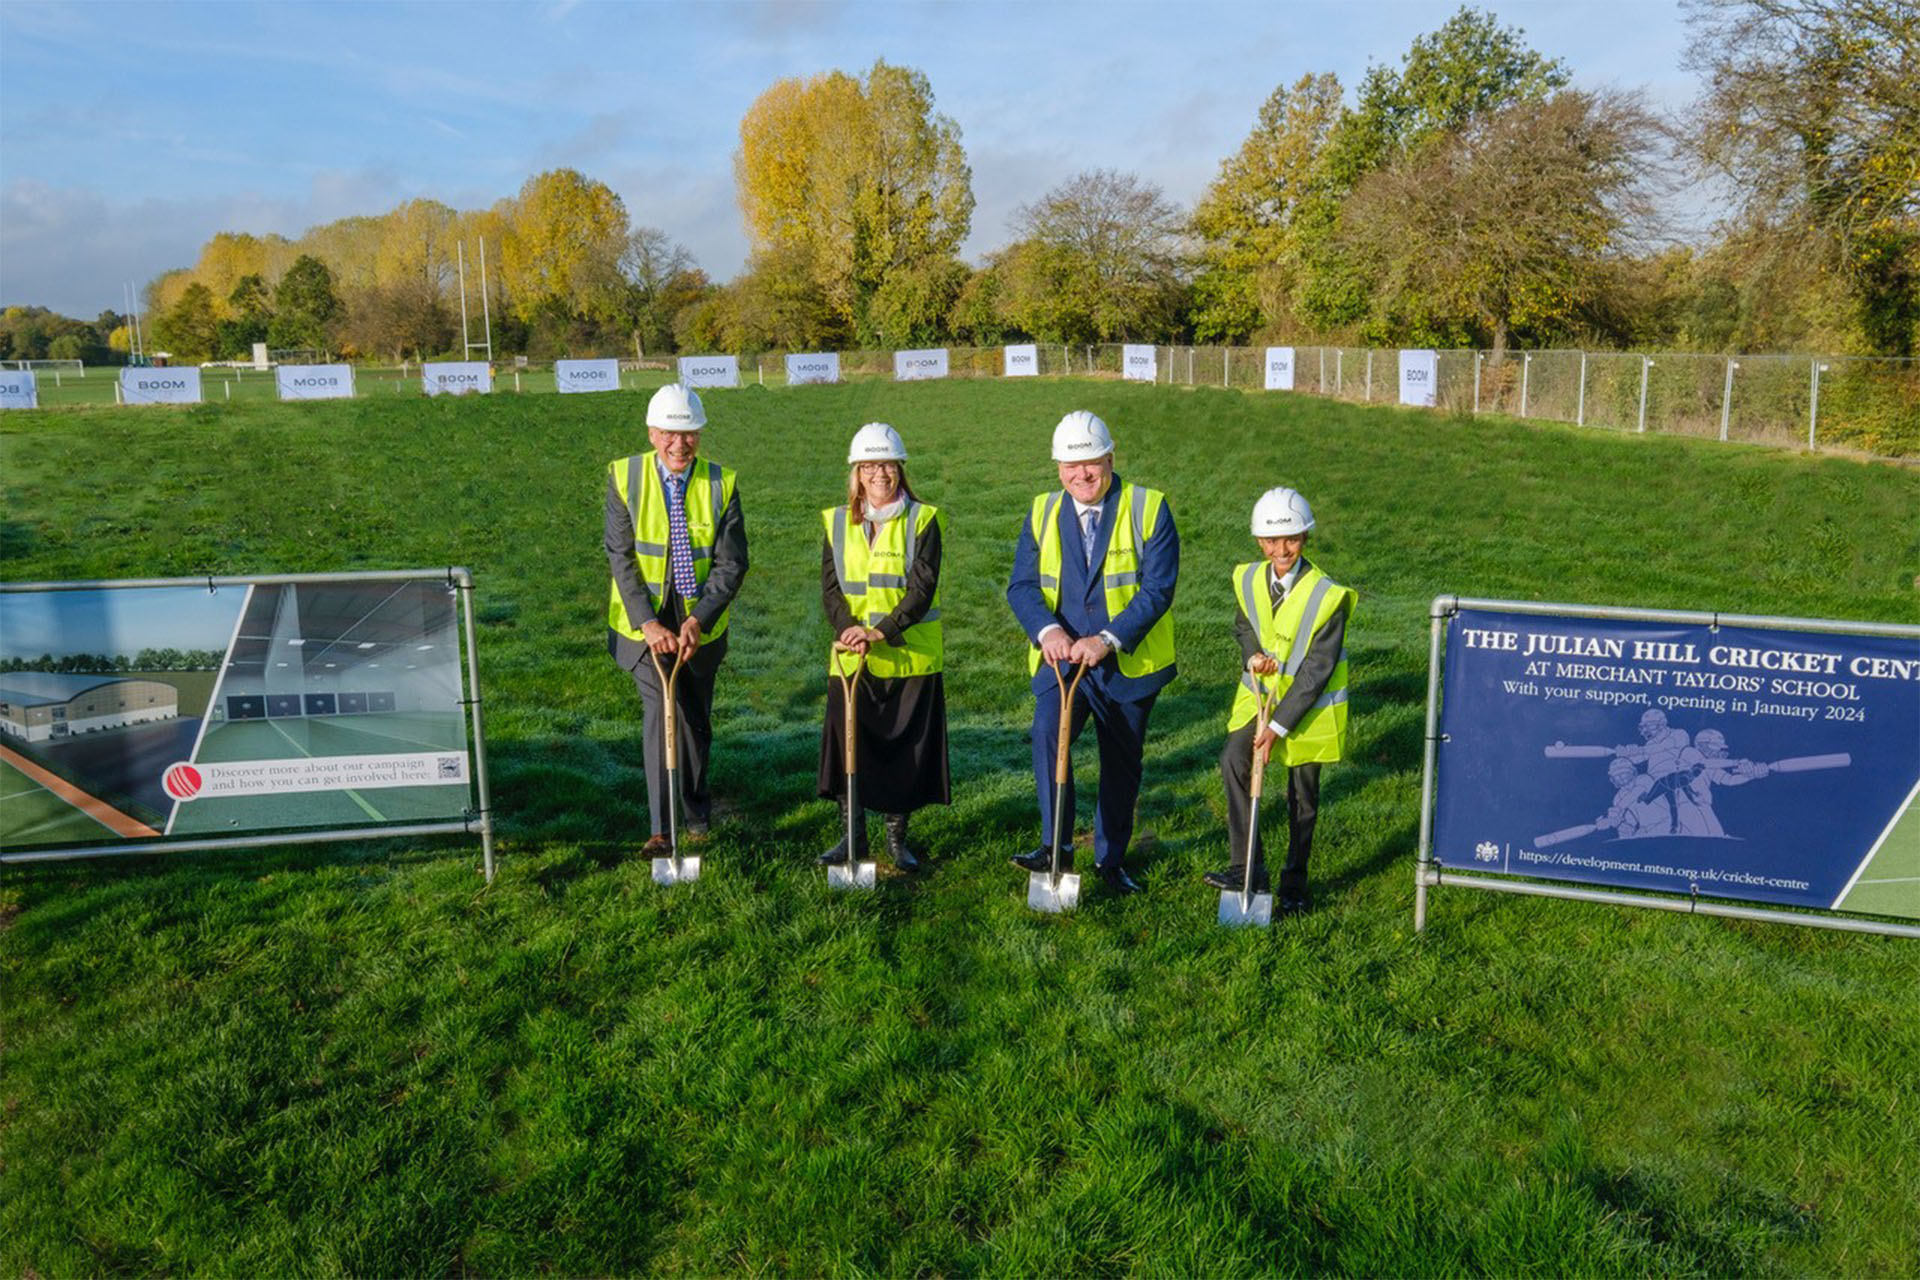 New Cricket Centre To Be Built At Merchant Taylors' School